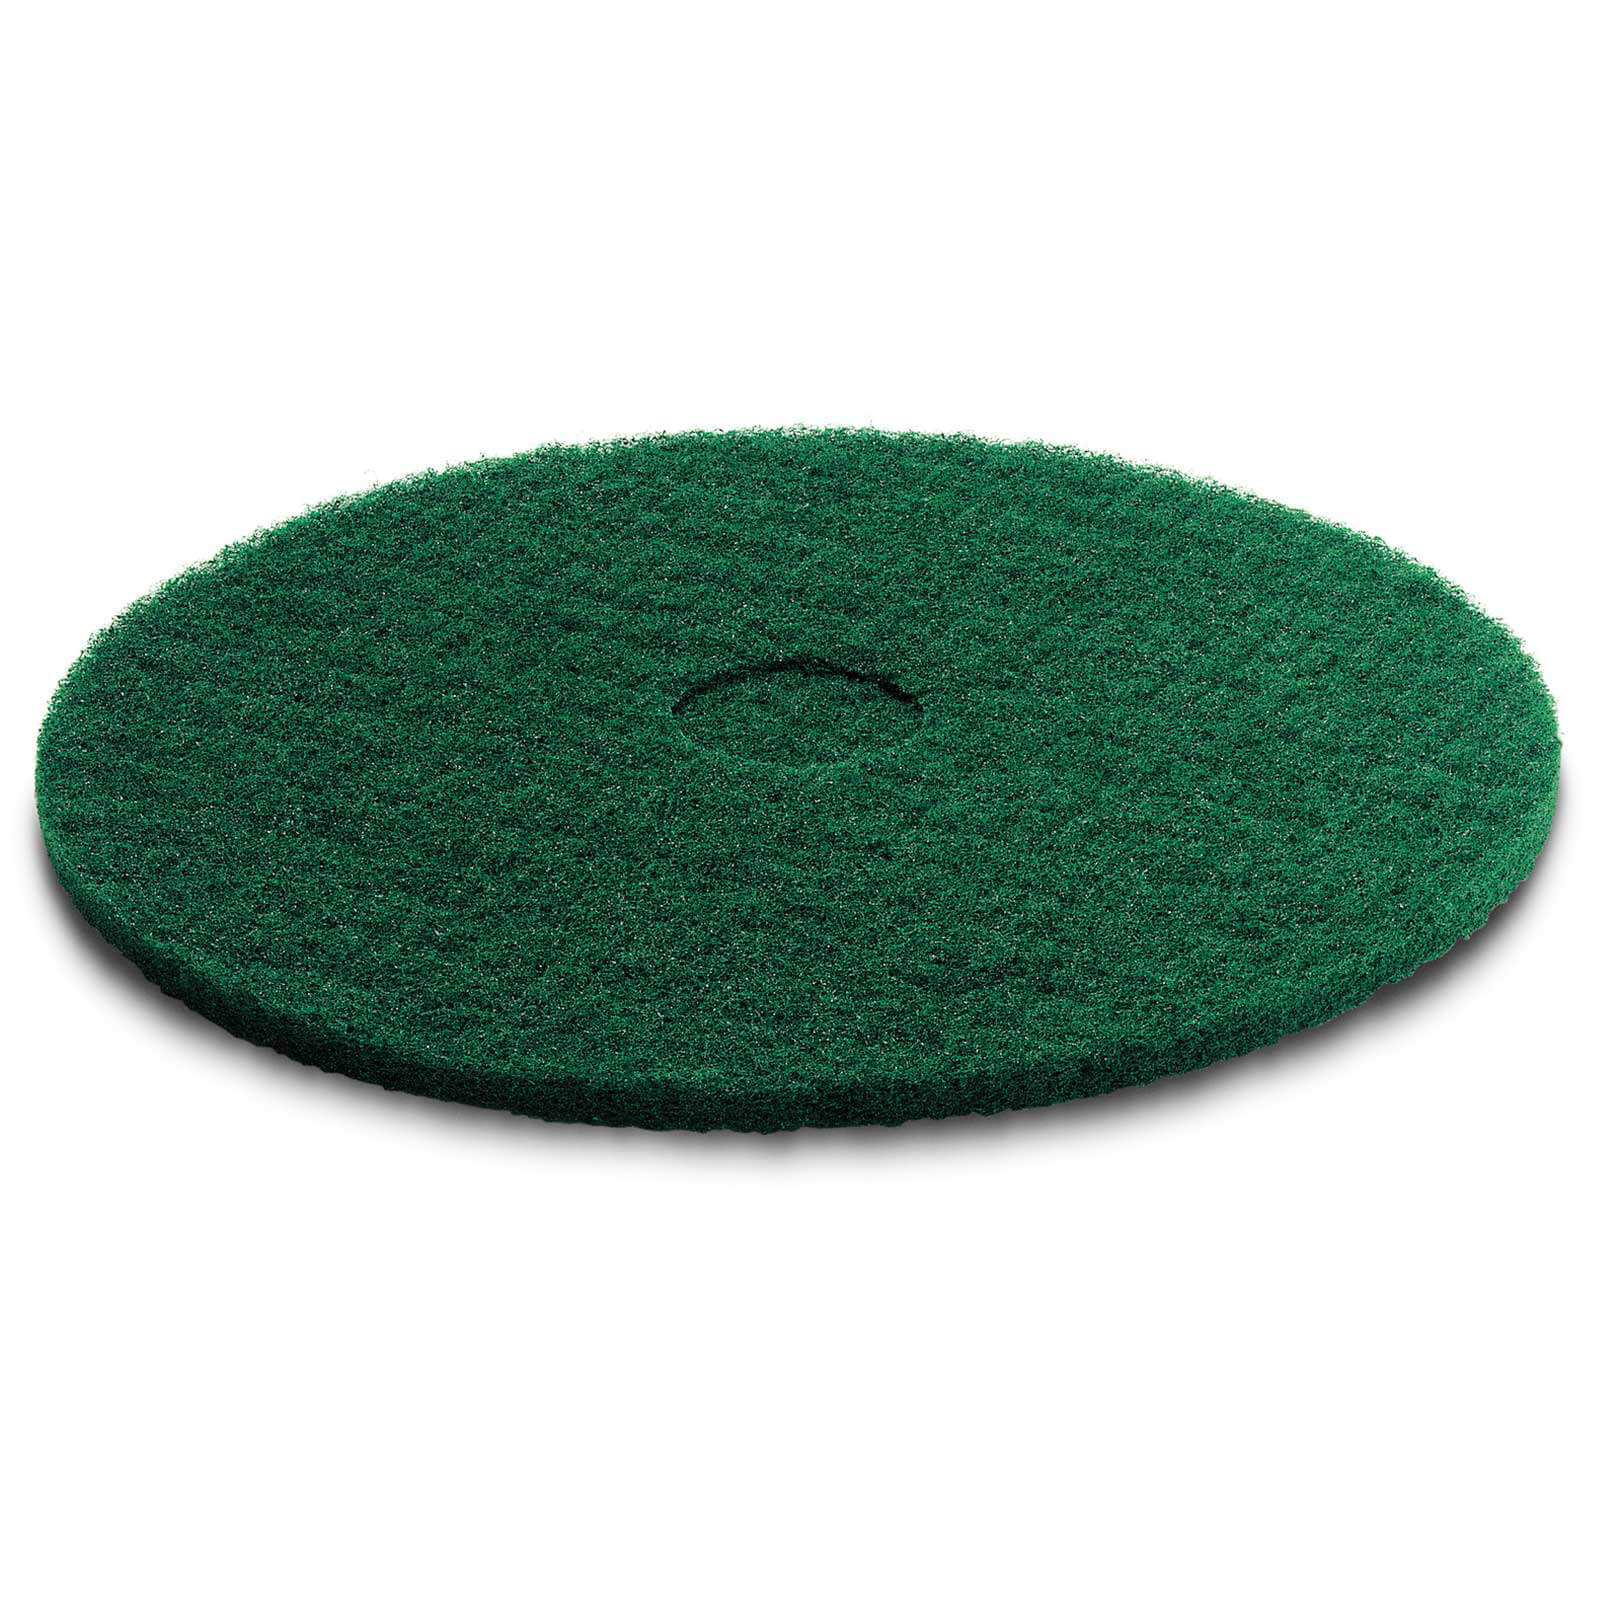 Photos - Household Cleaning Tool Karcher Floor Scrubber Pad Medium Hard Green 330 mm Pack of 5 